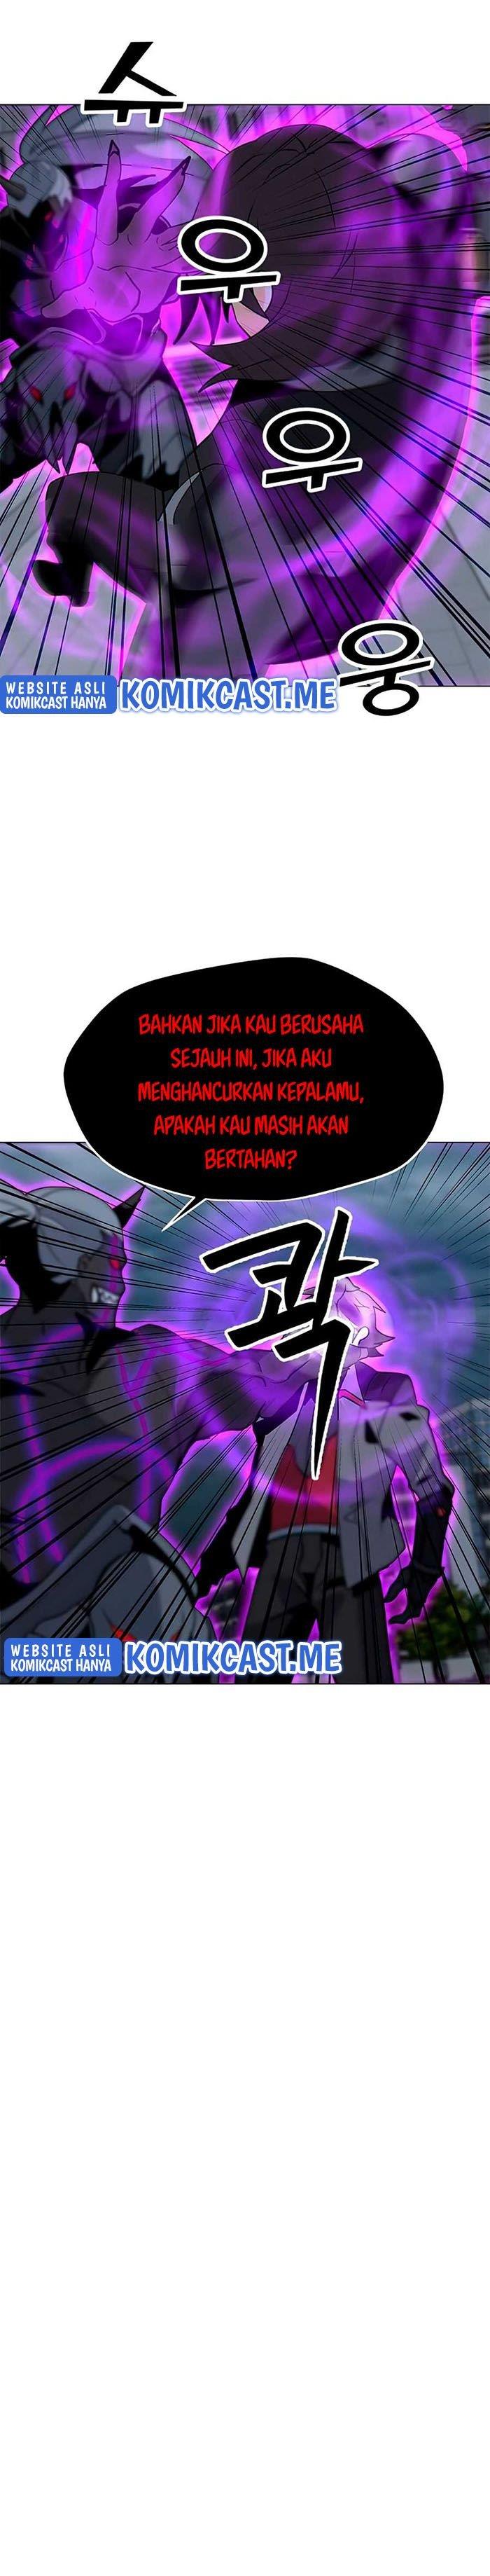 Solo Spell Caster Chapter 70